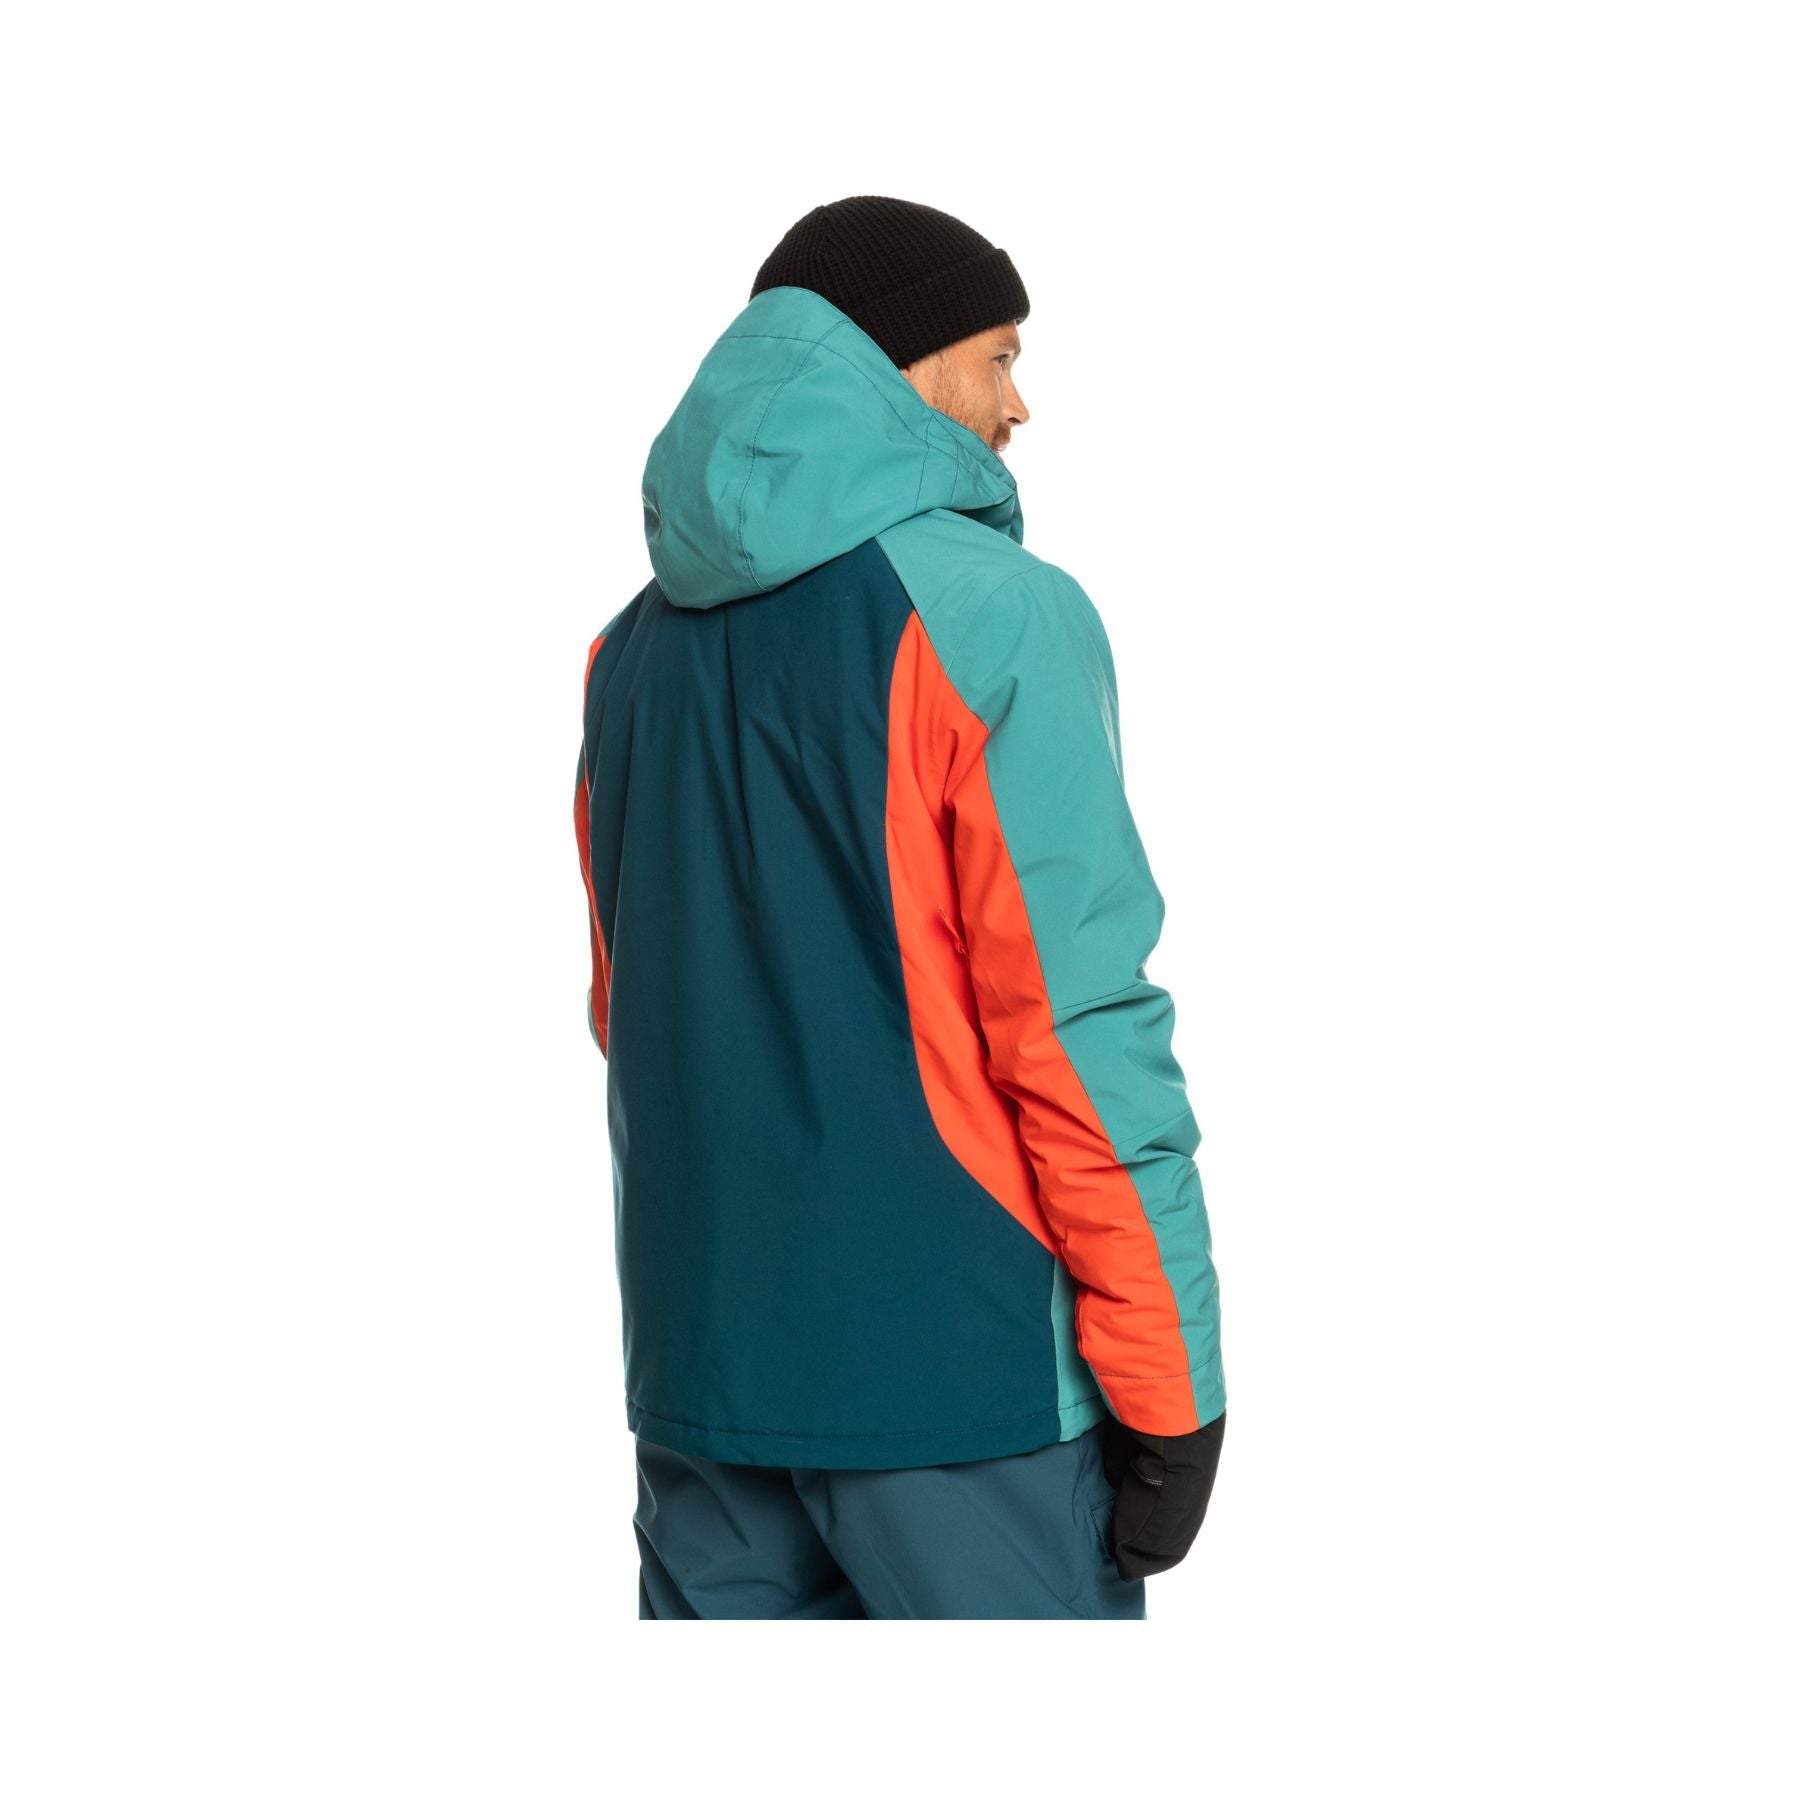 Quiksilver Mission Plus Jacket in Majolica Blue